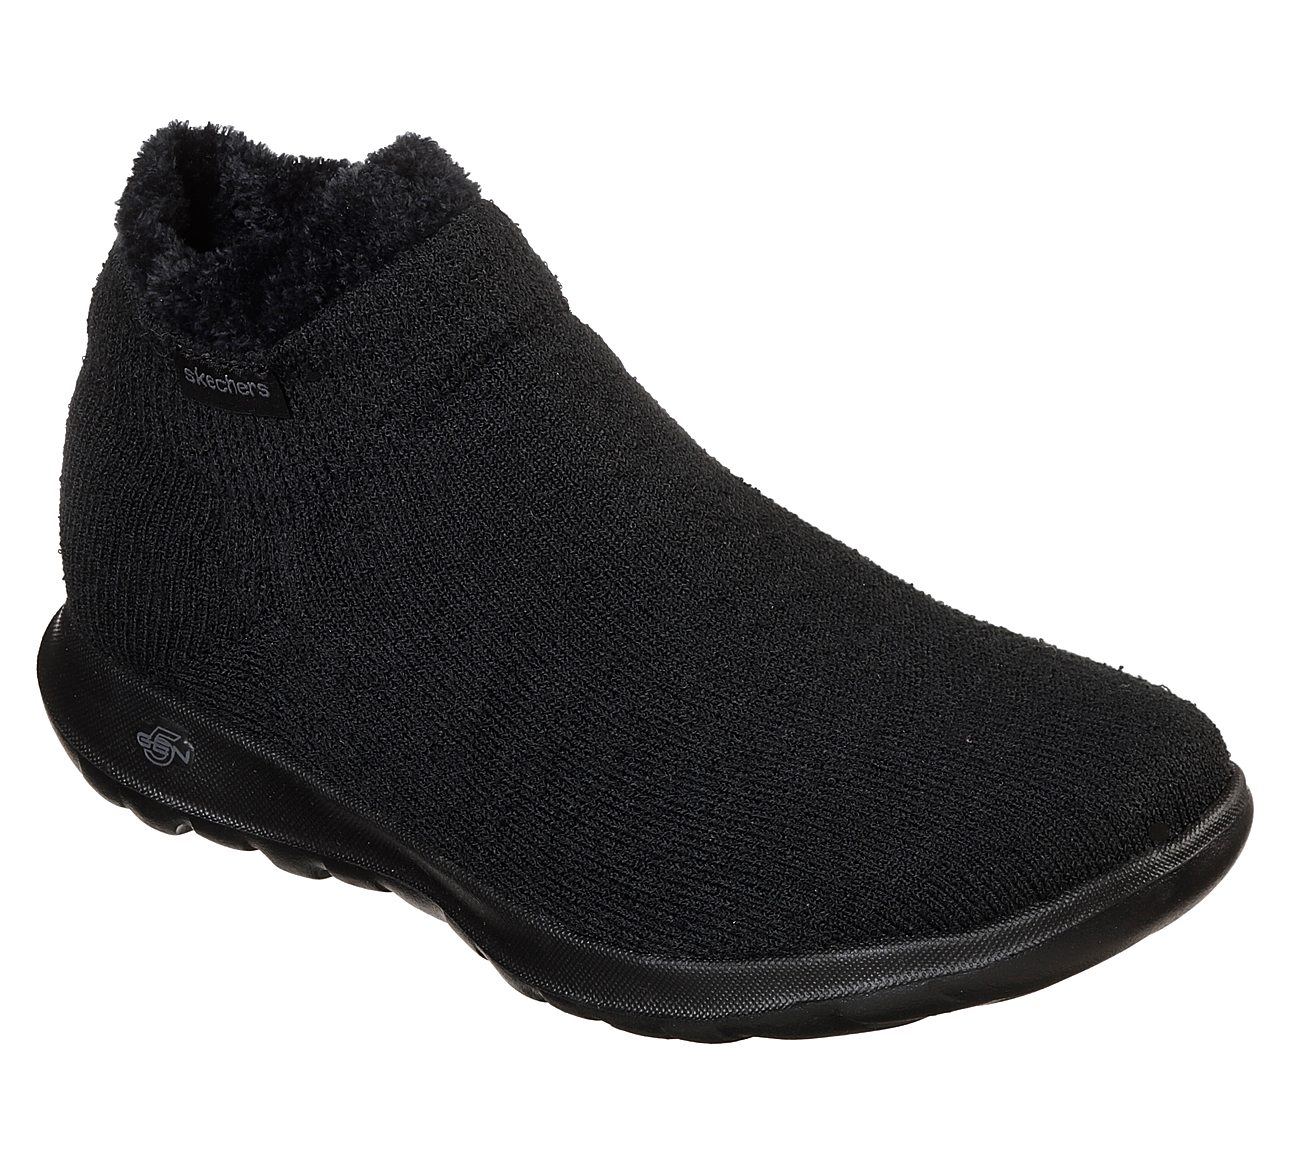 sketchers dolly shoes off 66% - online 